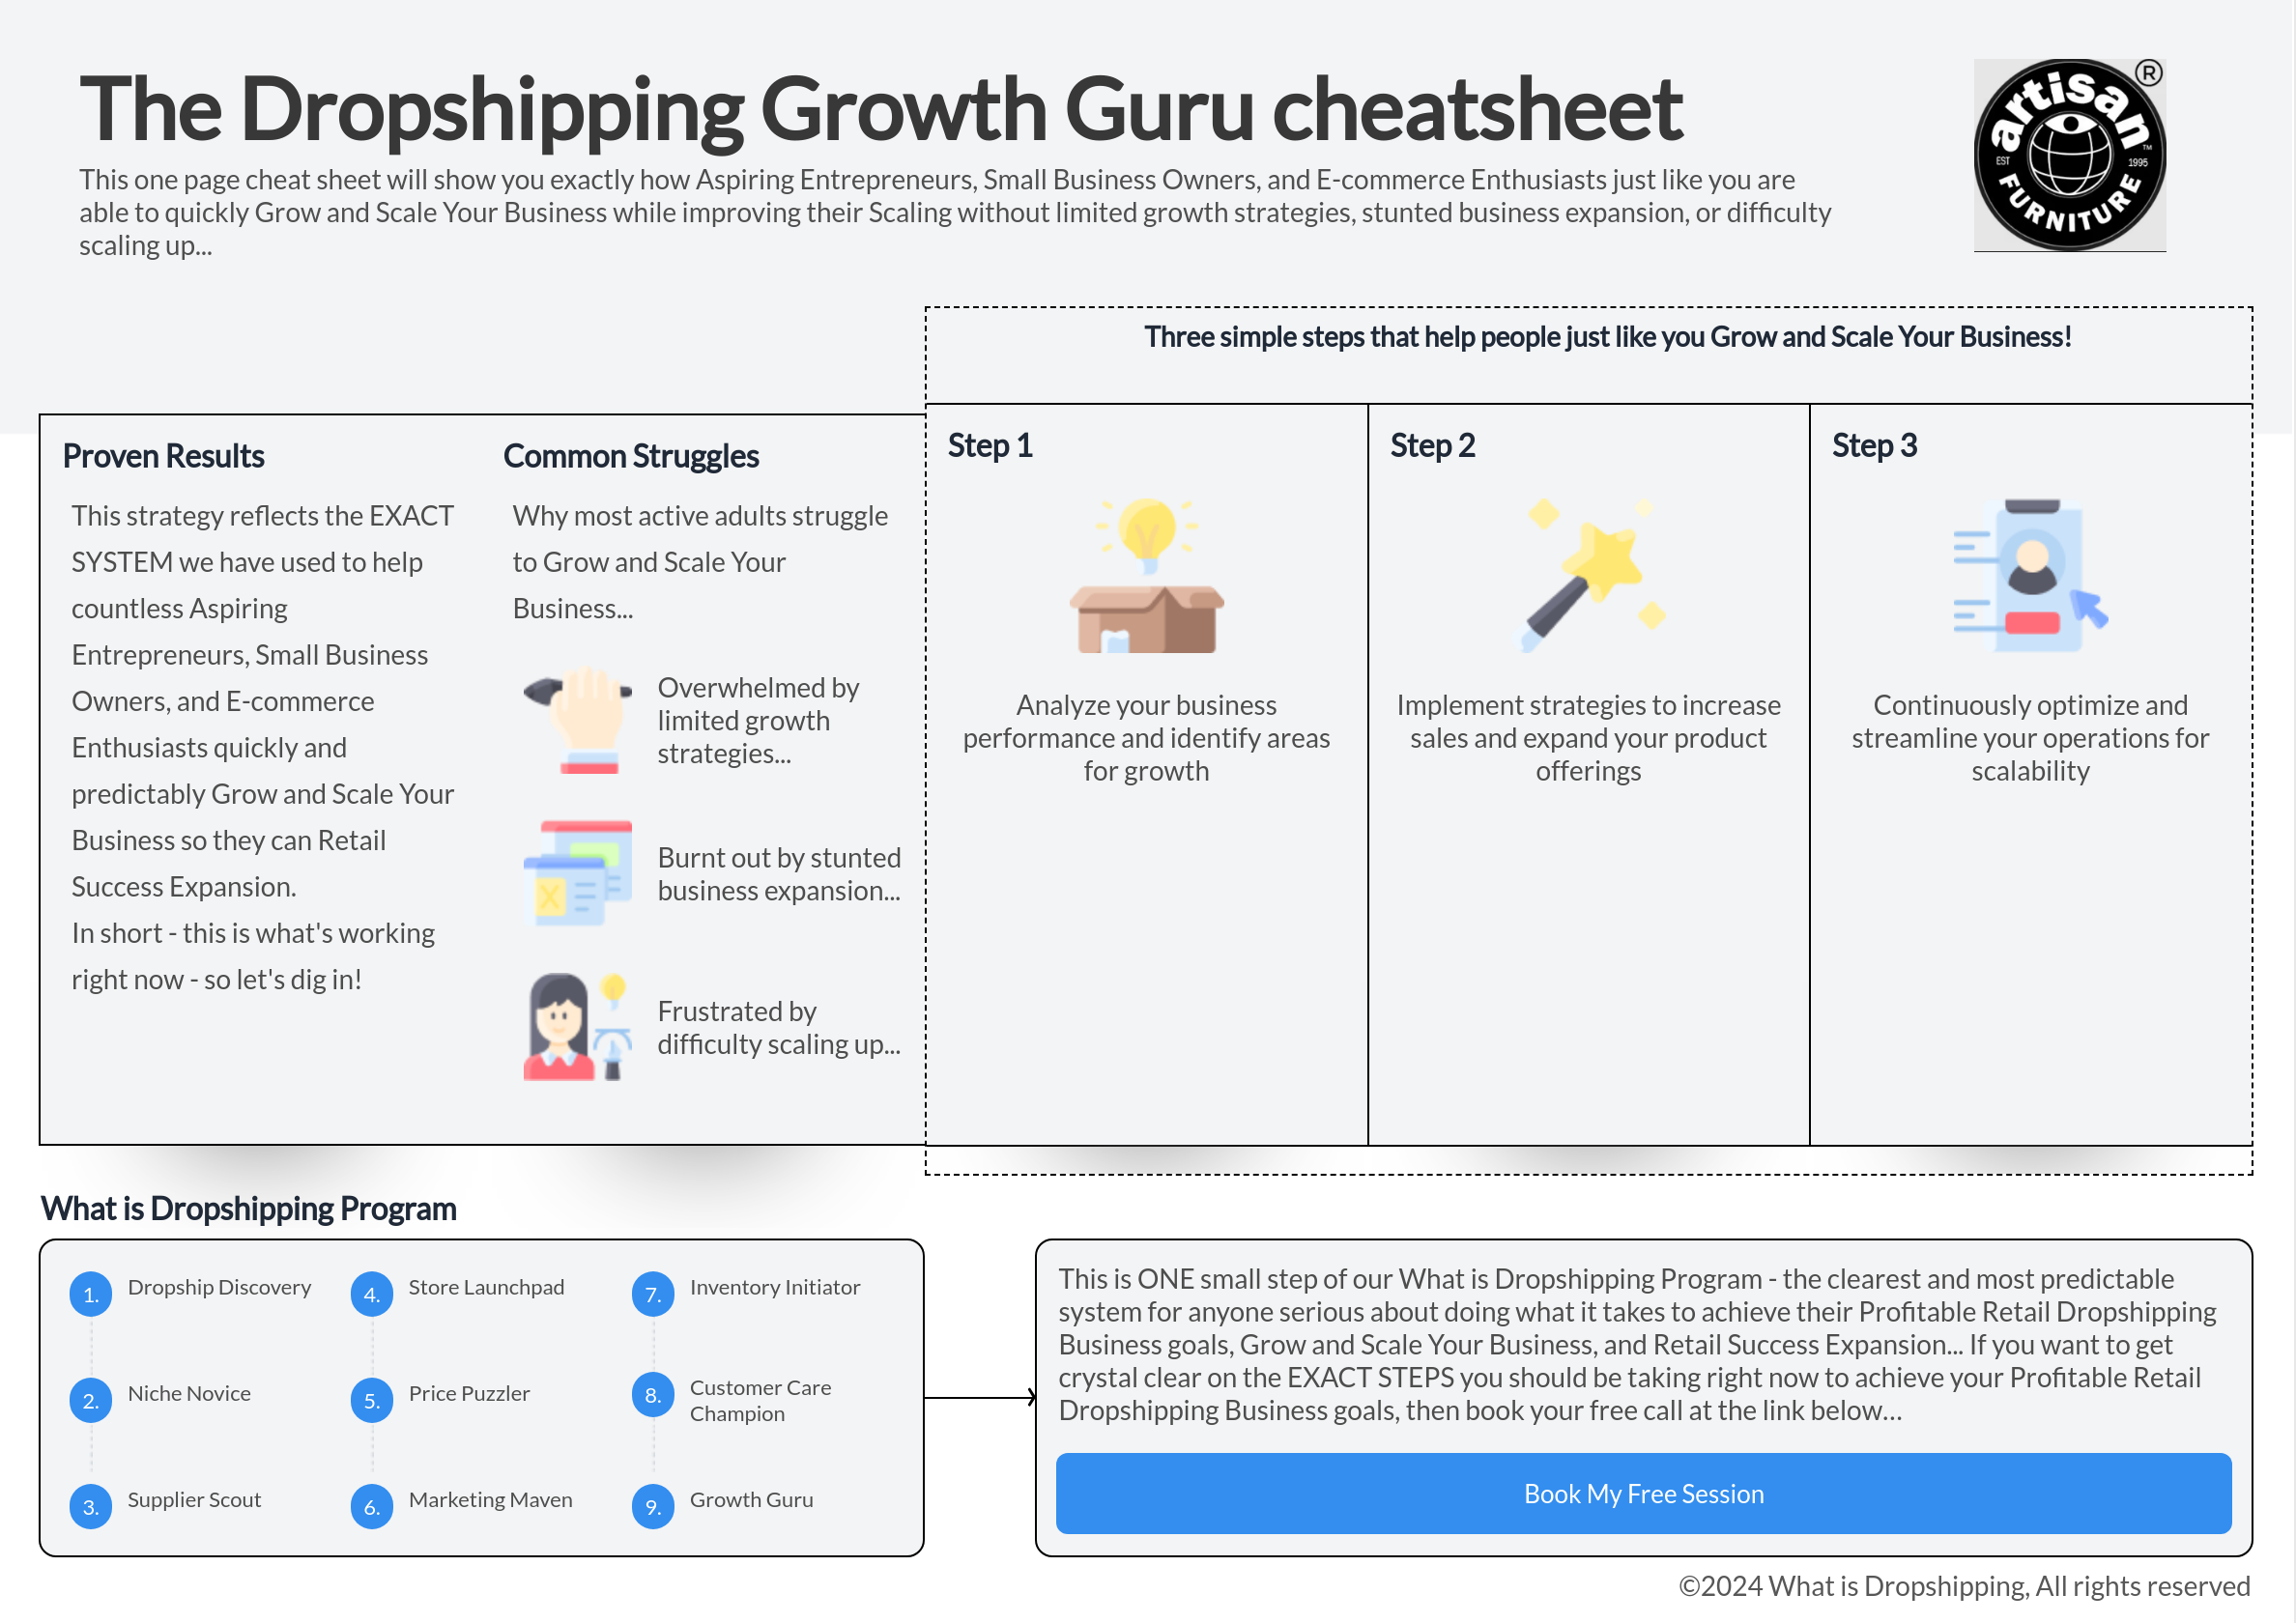 Infographic: Dropshipping business growth guide and cheat sheet.